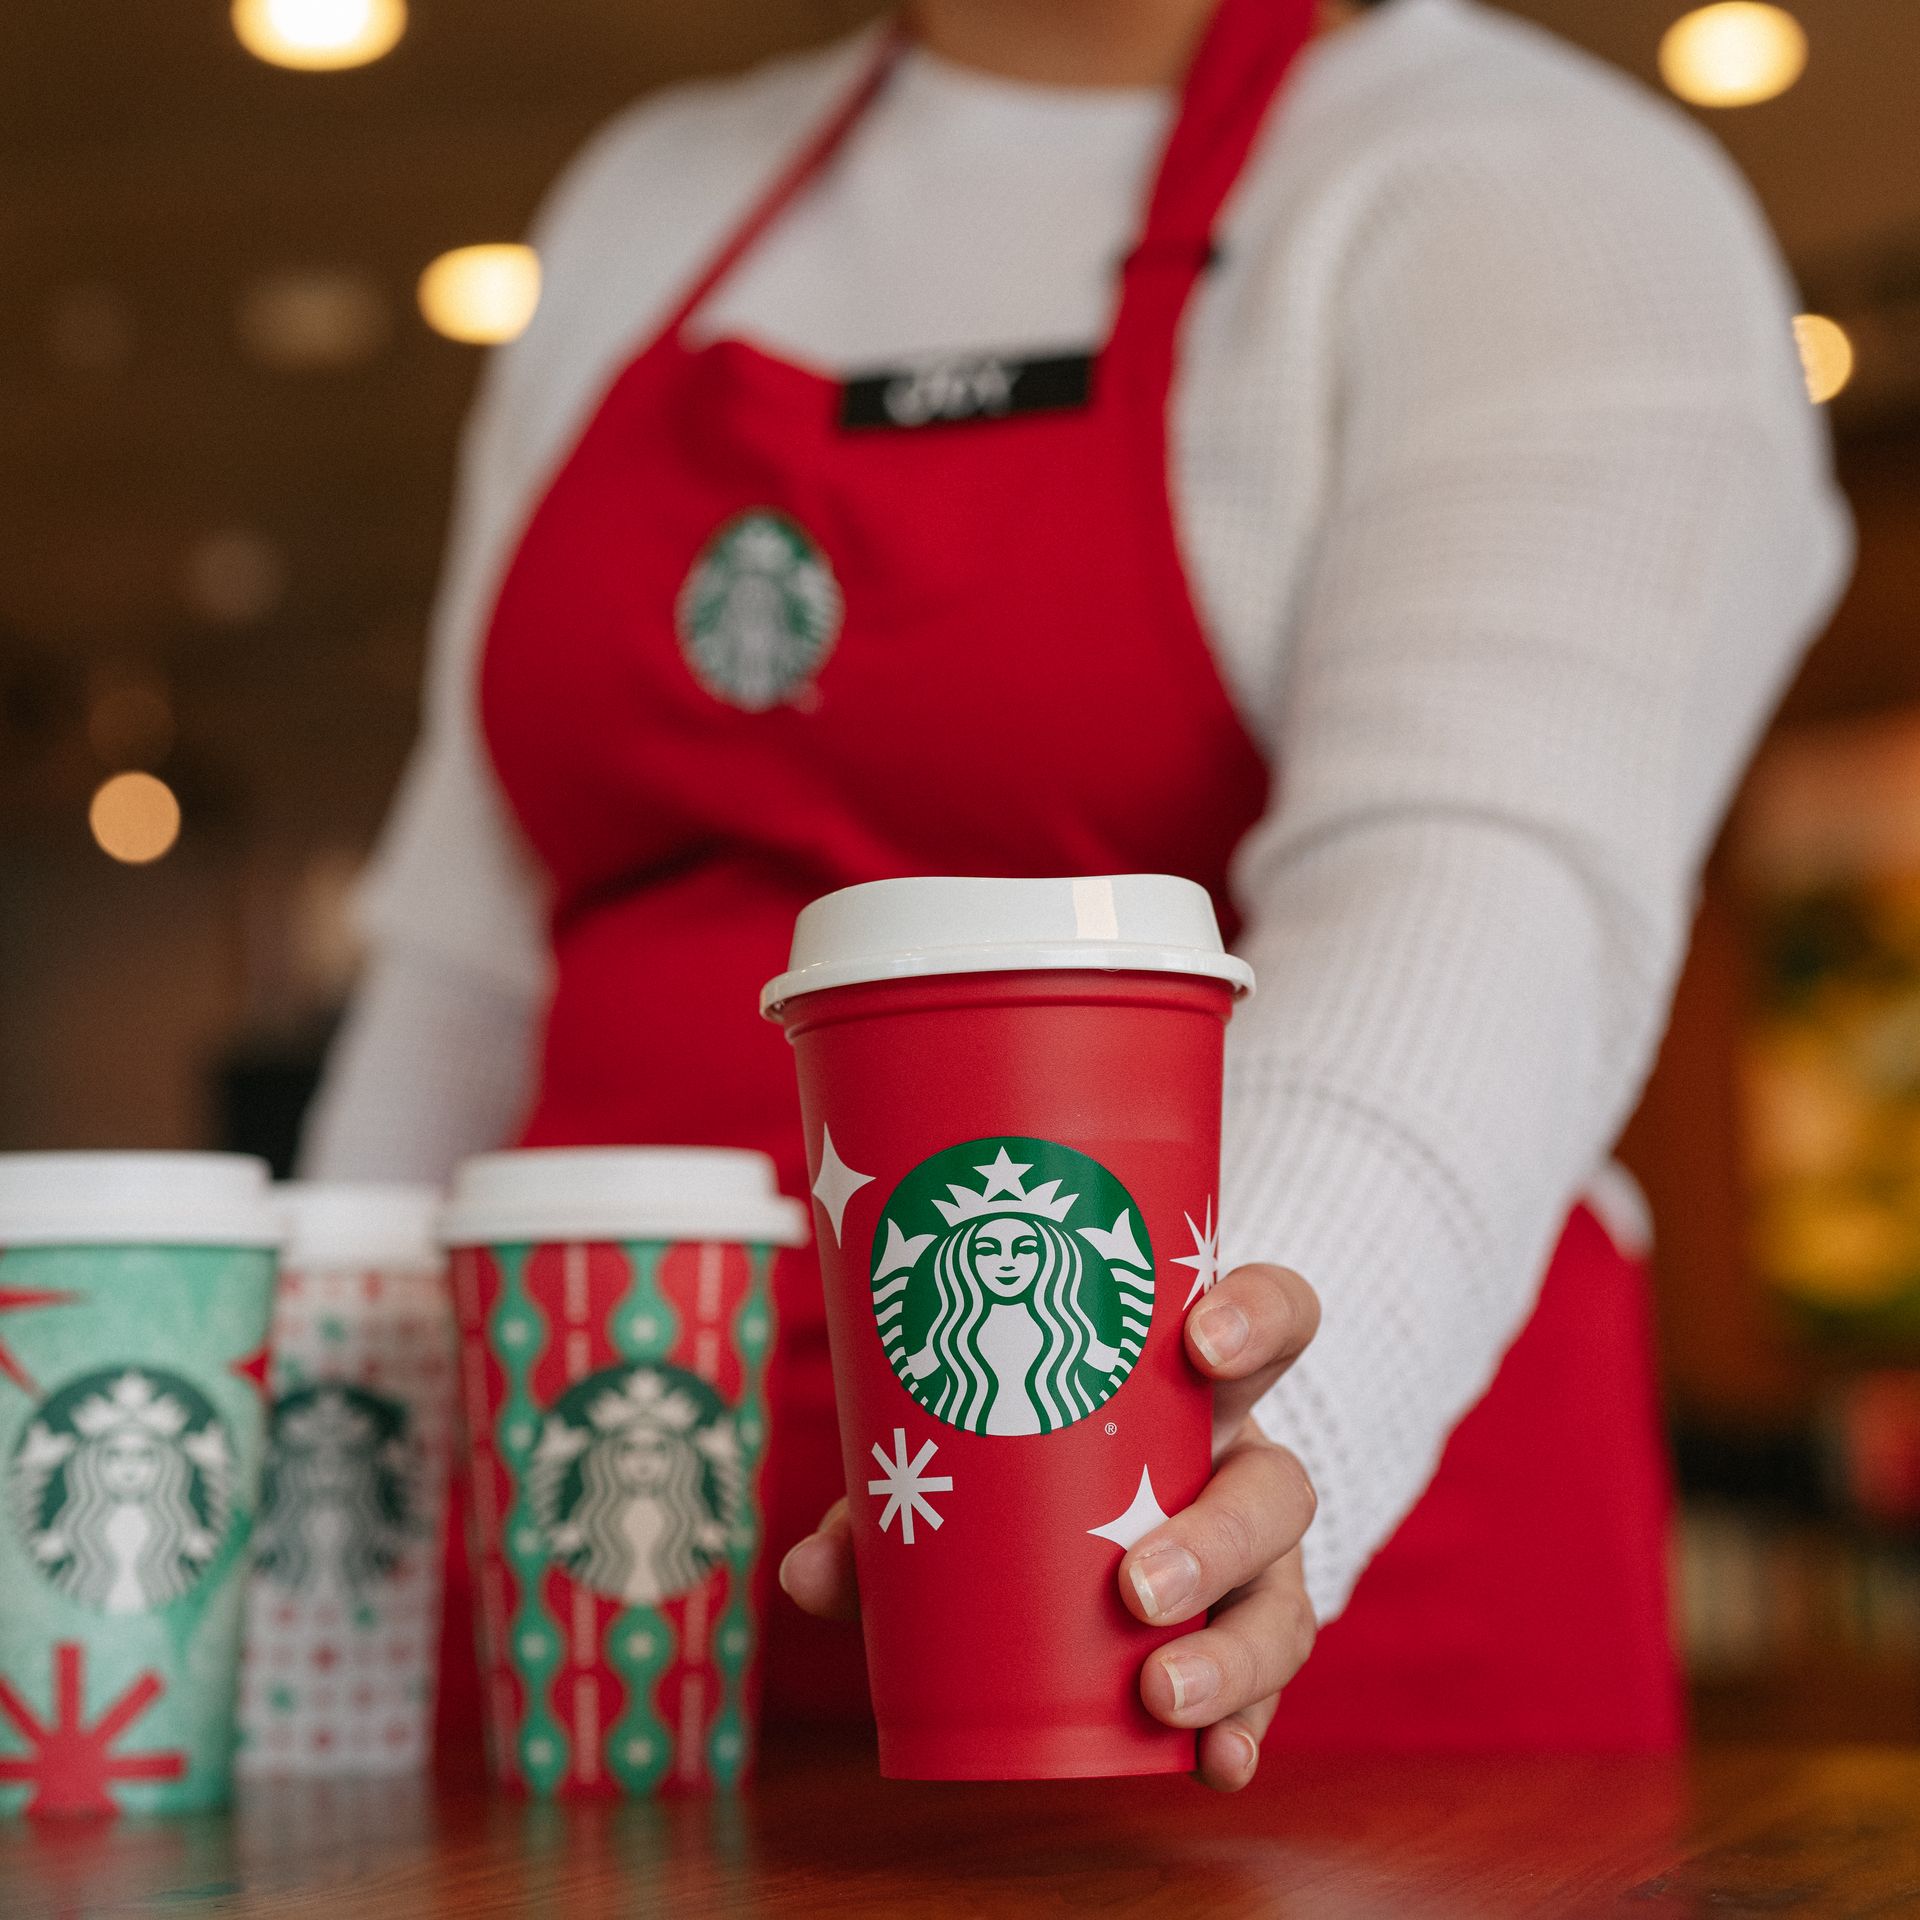 Starbucks Red Cup Day: Get free cup Thursday with holiday drink purchase